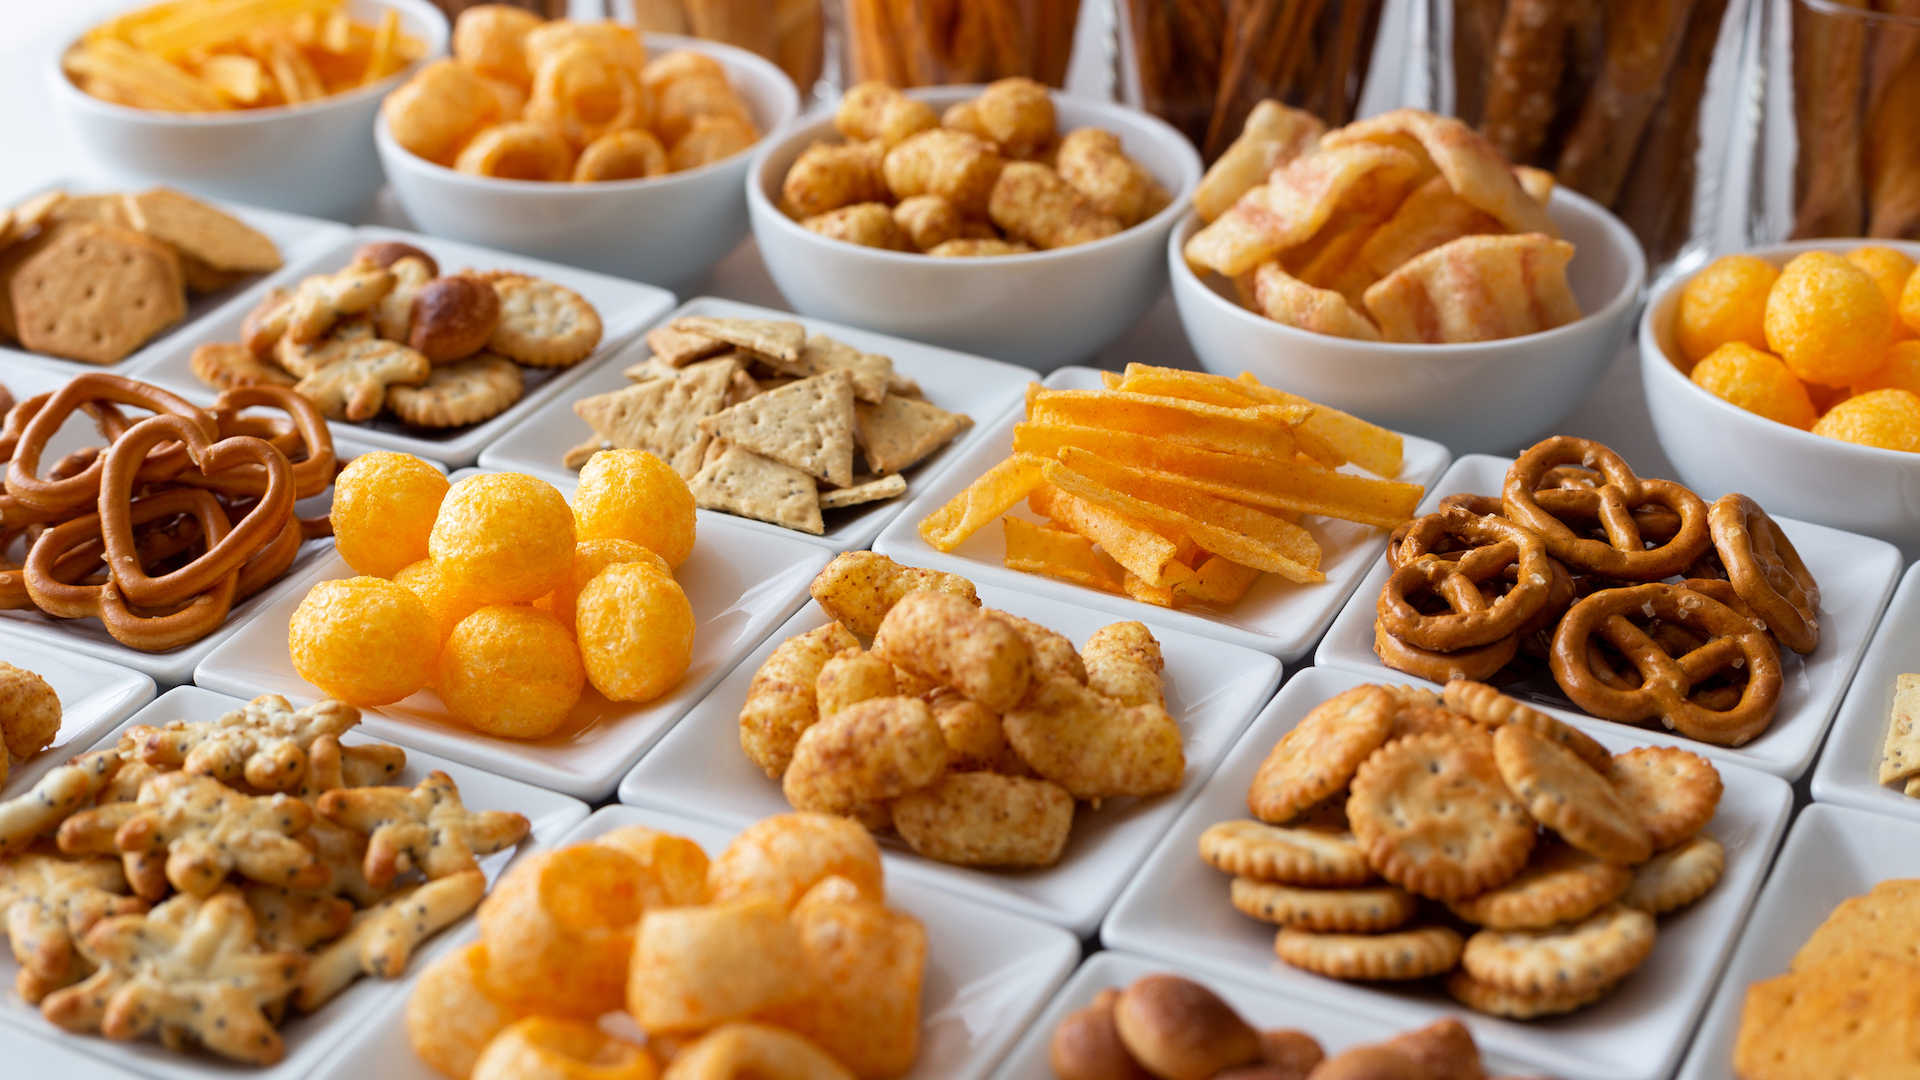 A tray full of crisps and snacks